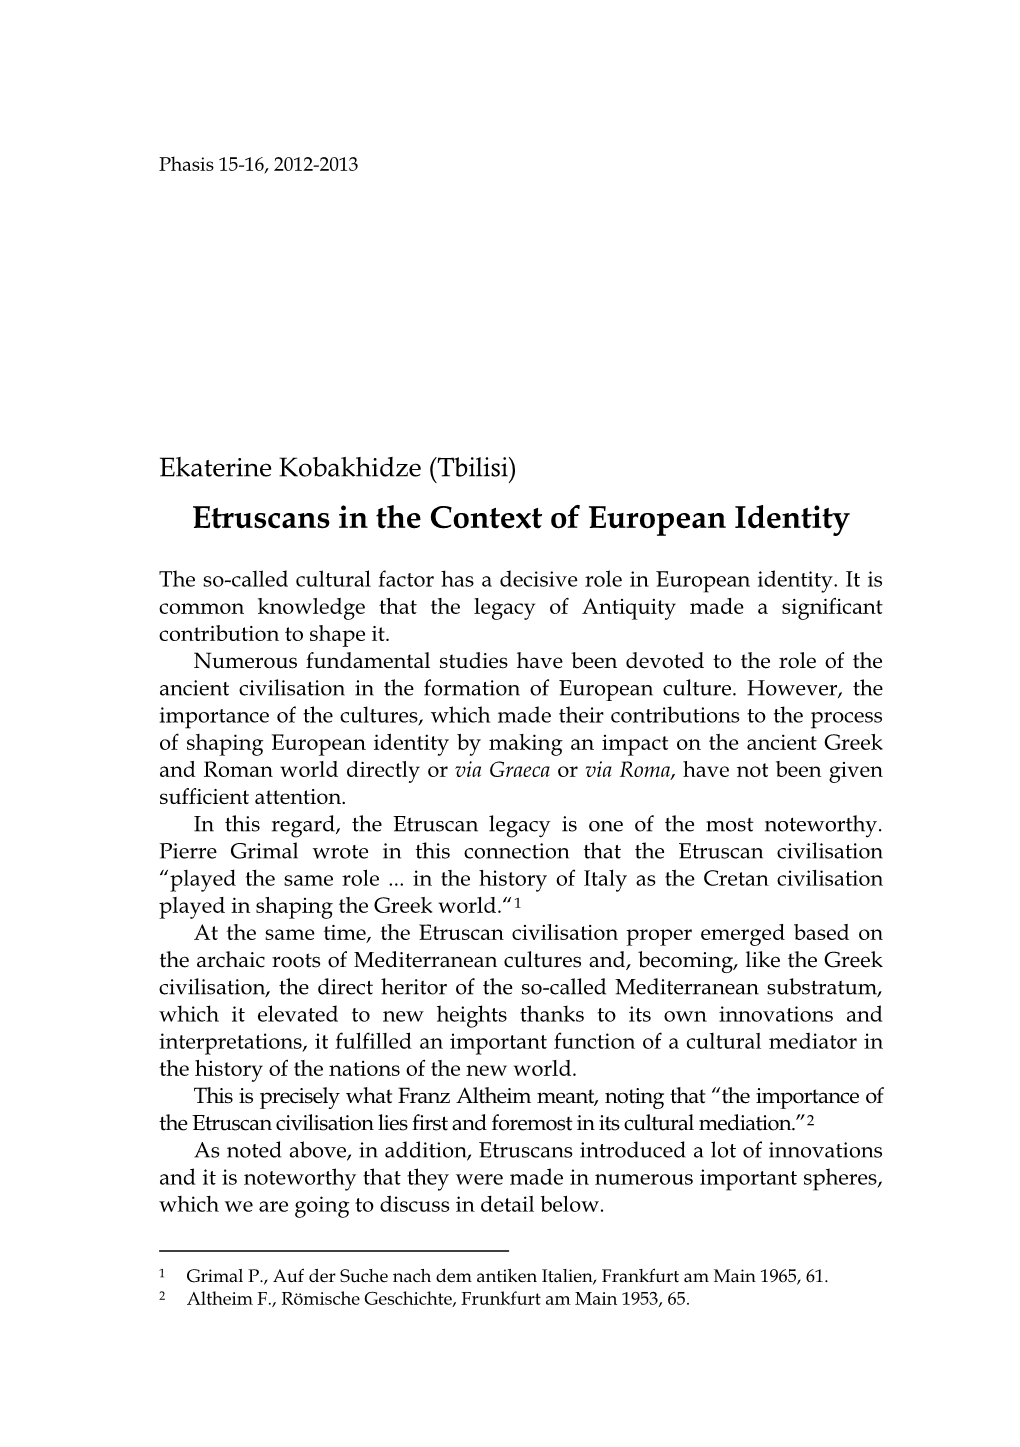 Etruscans in the Context of European Identity